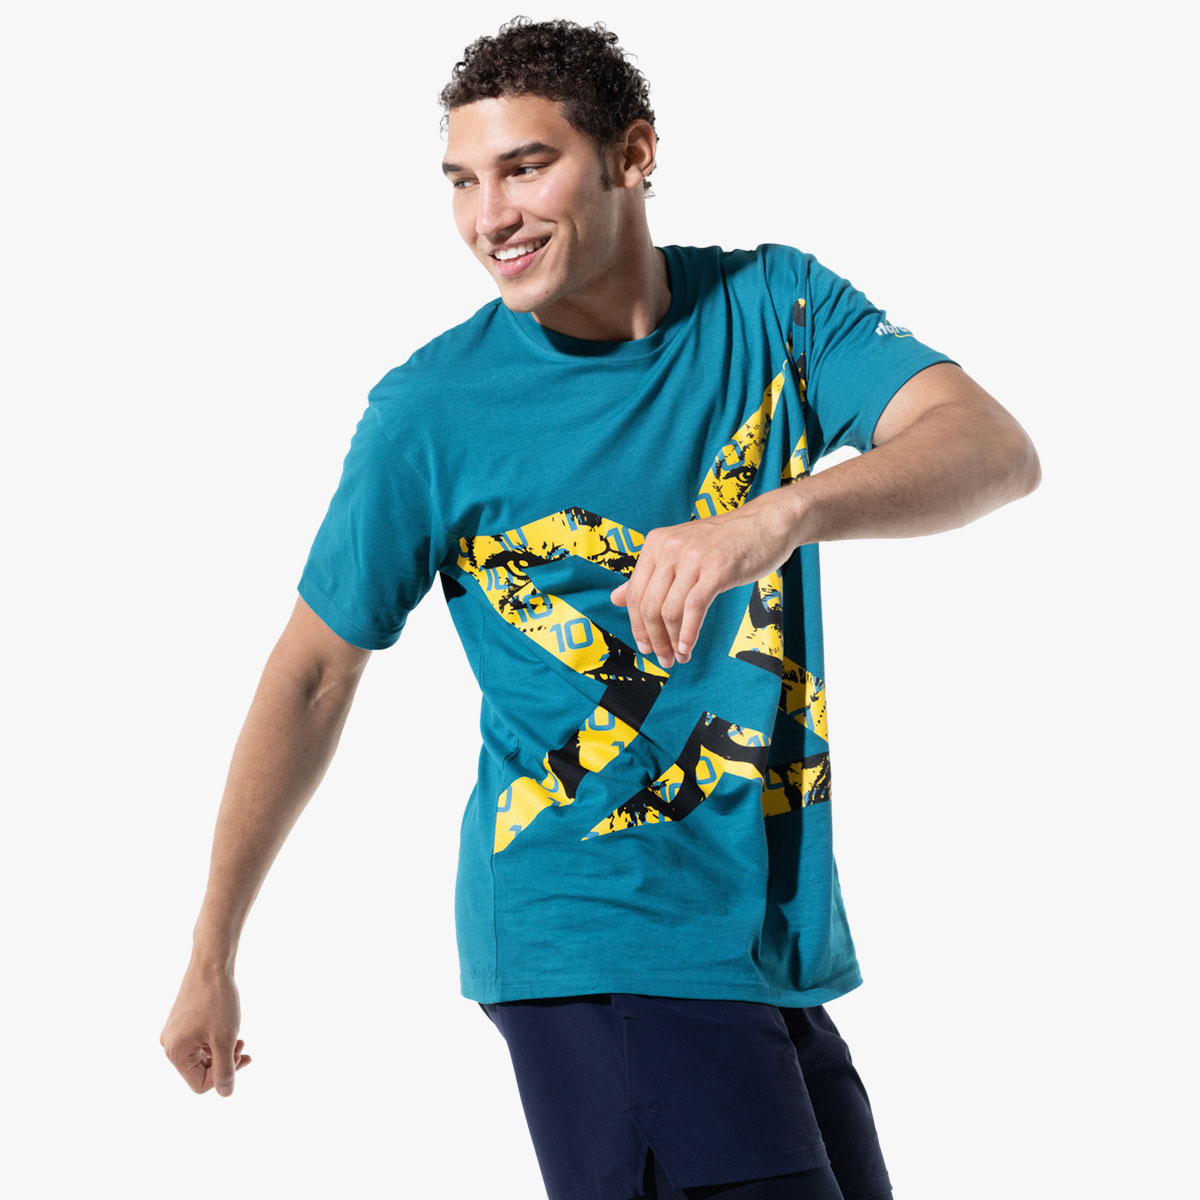 Messi x Hard Rock Adult Fit Crew Tee in Teal image number 5